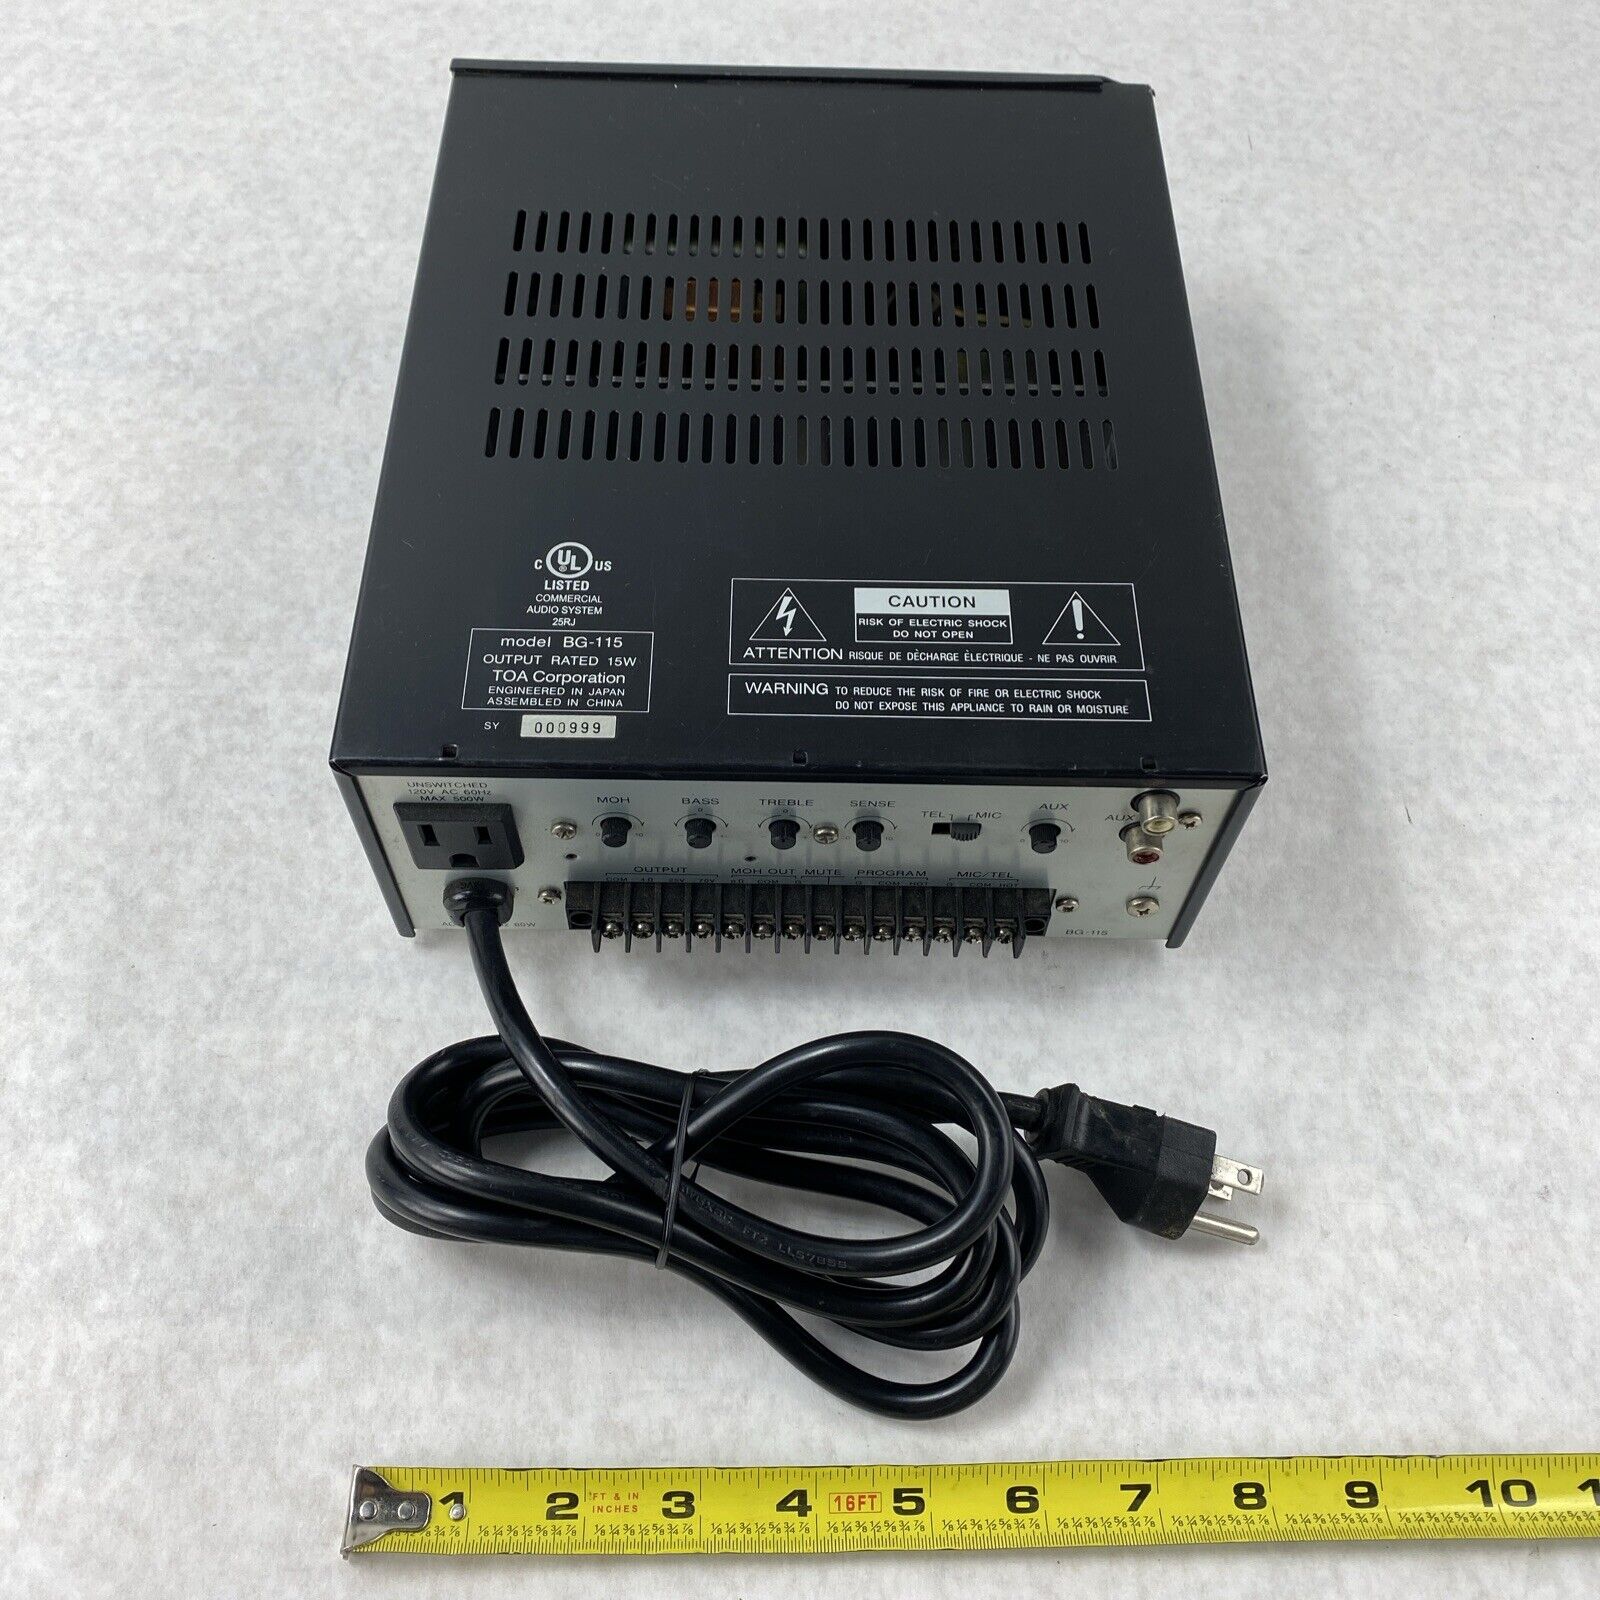 TOA BG-115 15W Integrated Amplifier Grade C UNTESTED POWERS ON